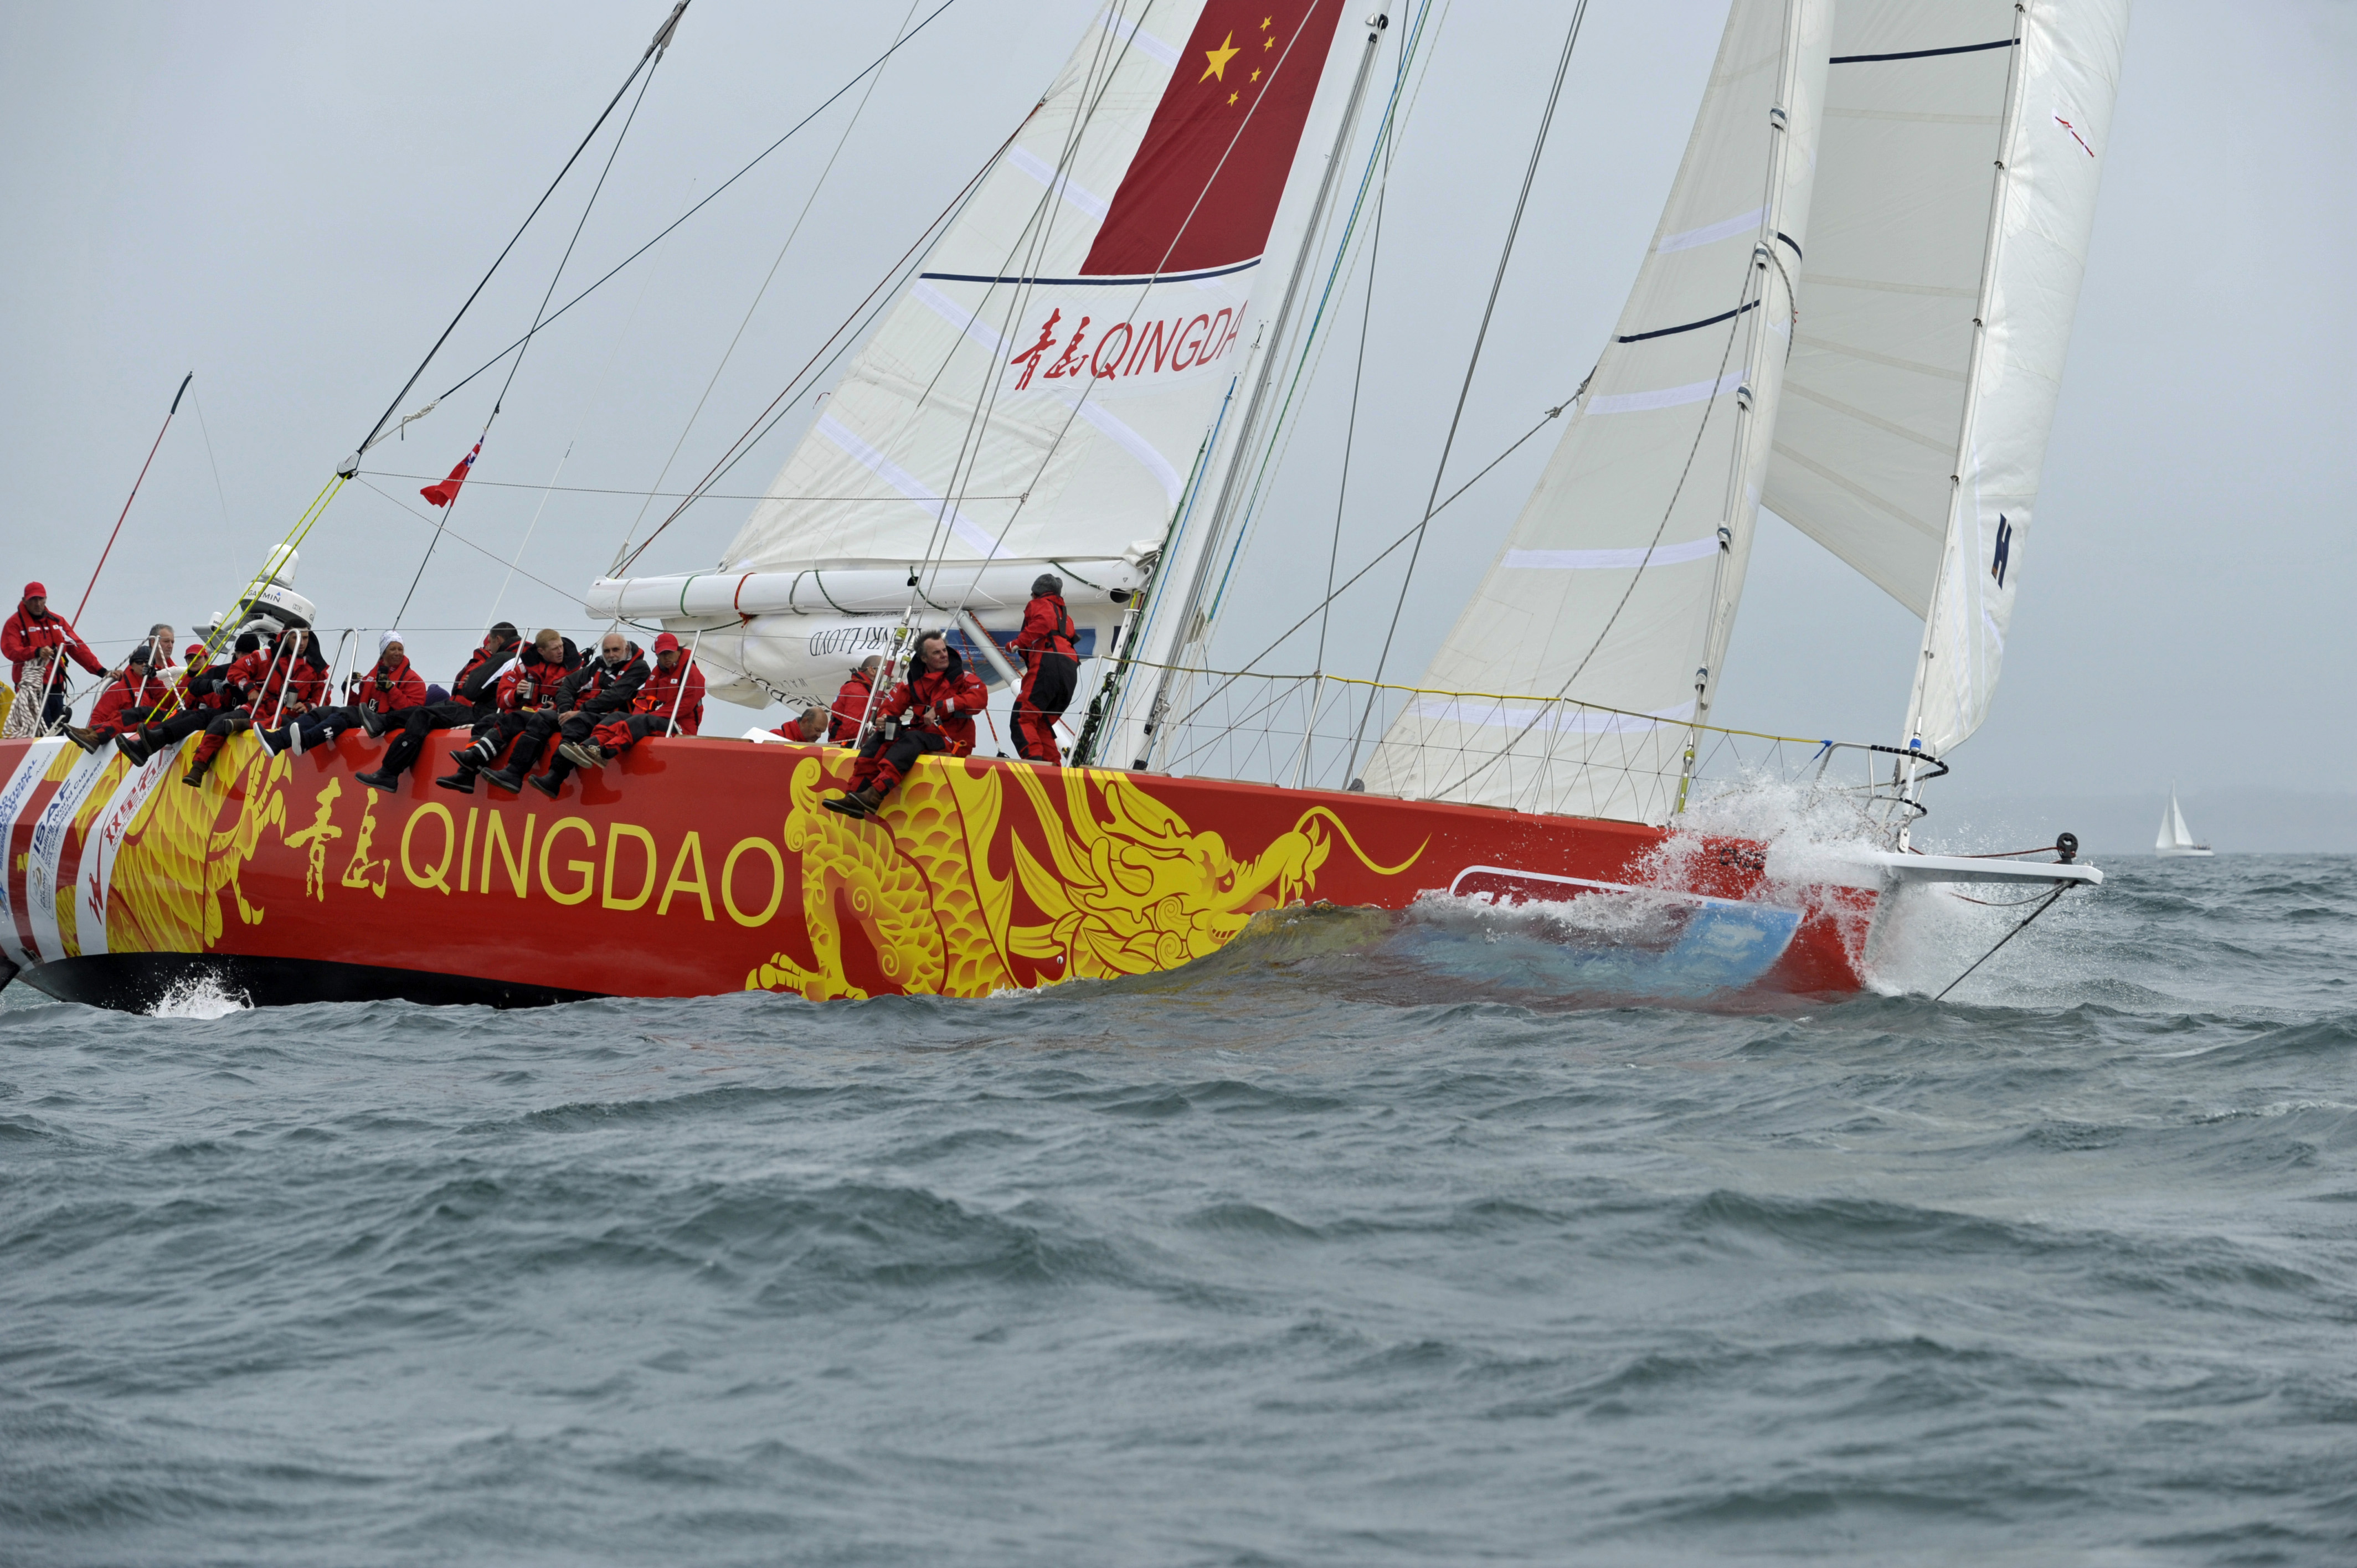 The Qingdao yacht in action during the 2013-14 race. 